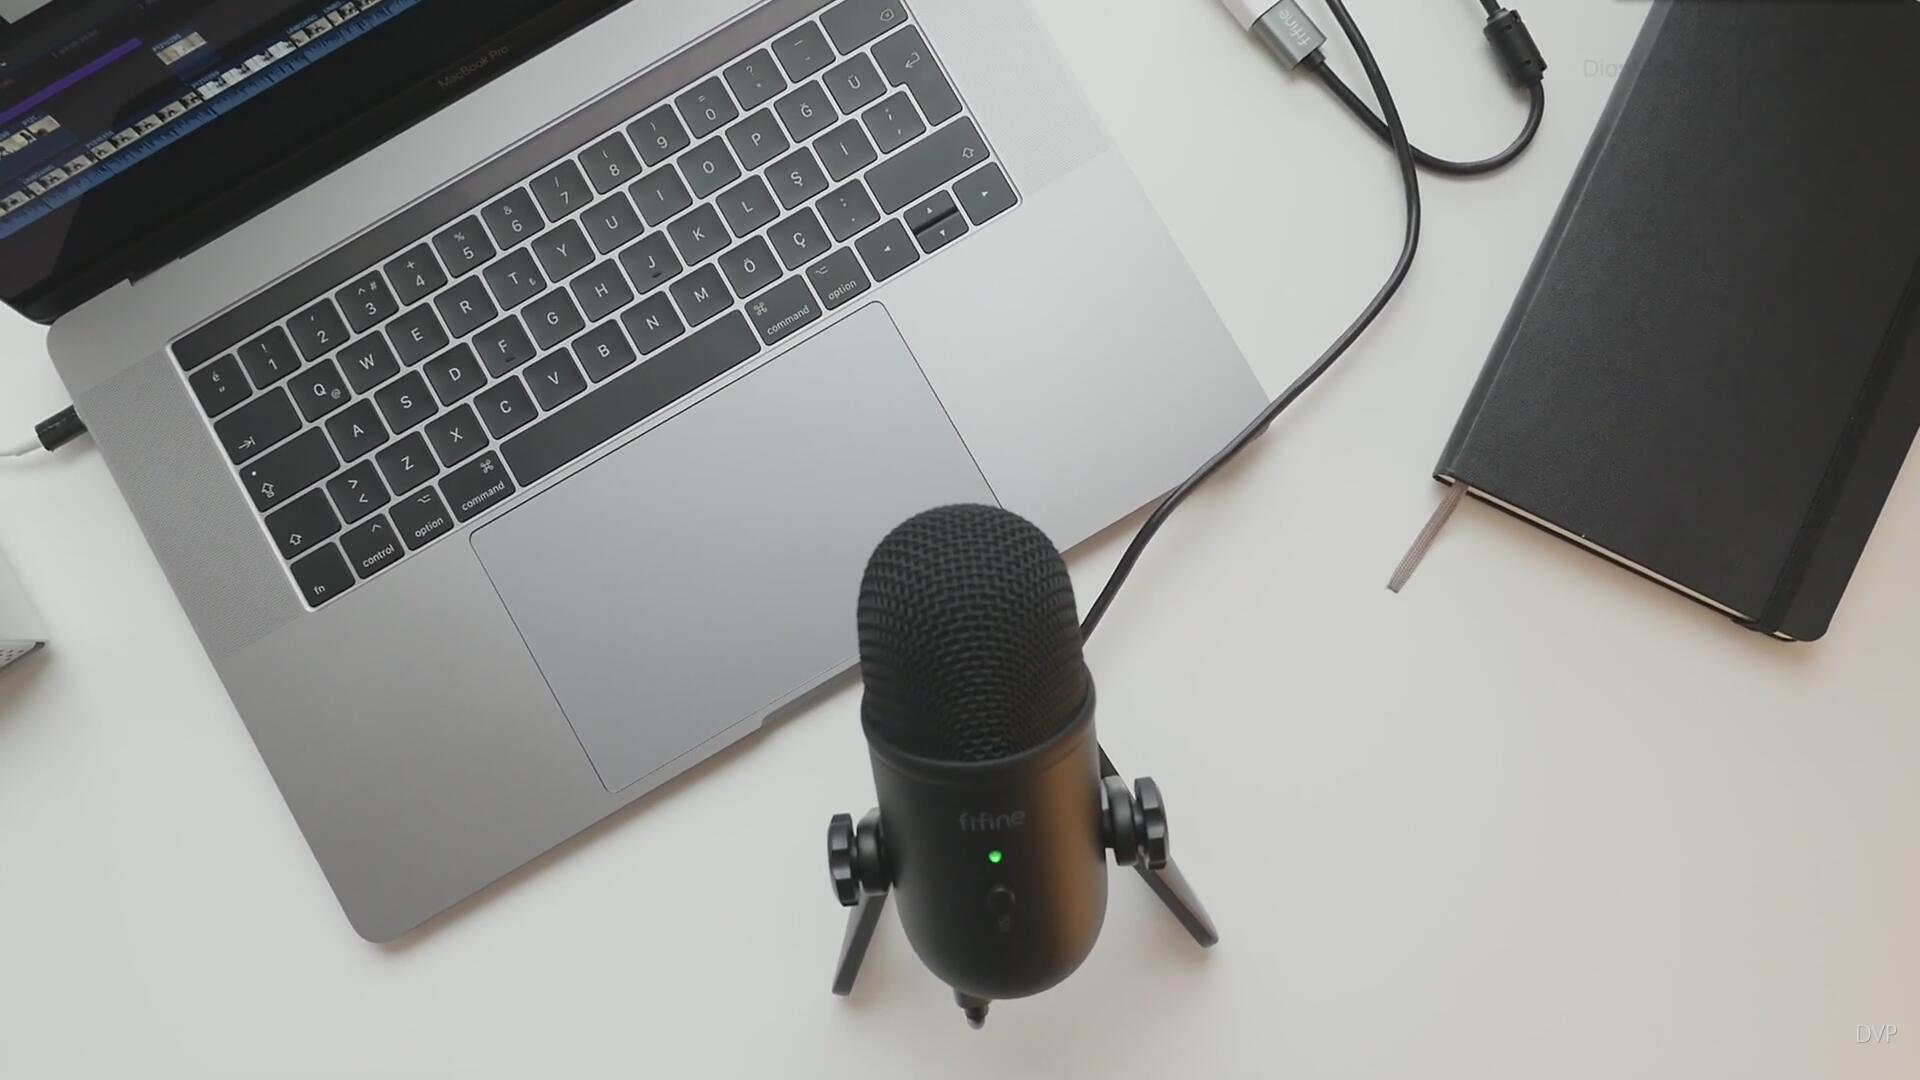 FIFINE K688 Podcast Microphone: Unveiling the Truth